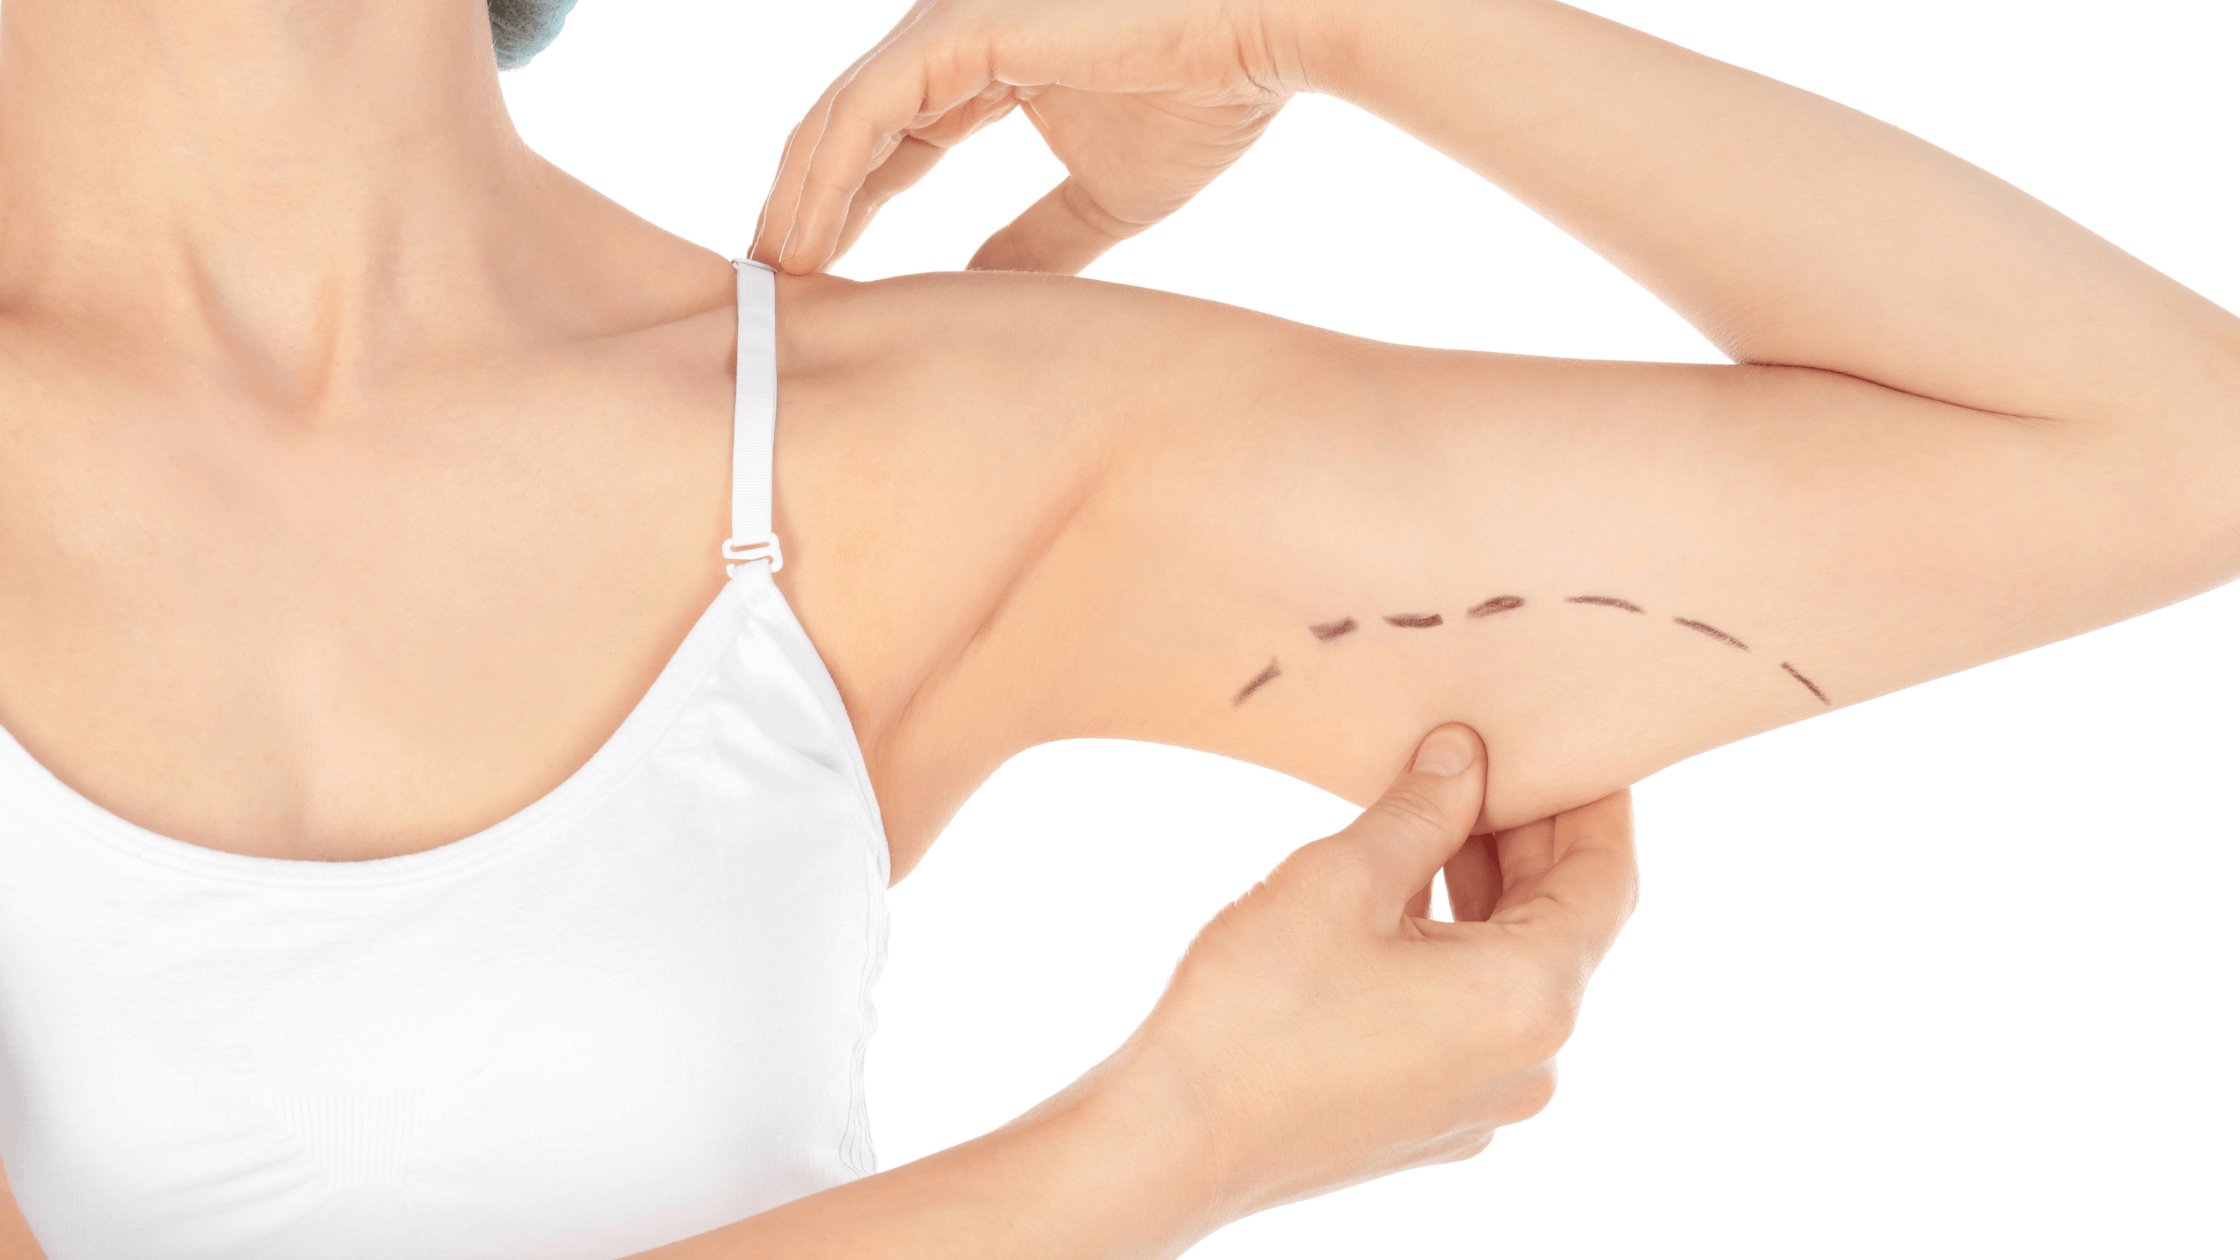 What is Arm Lift Surgery Recovery Like?